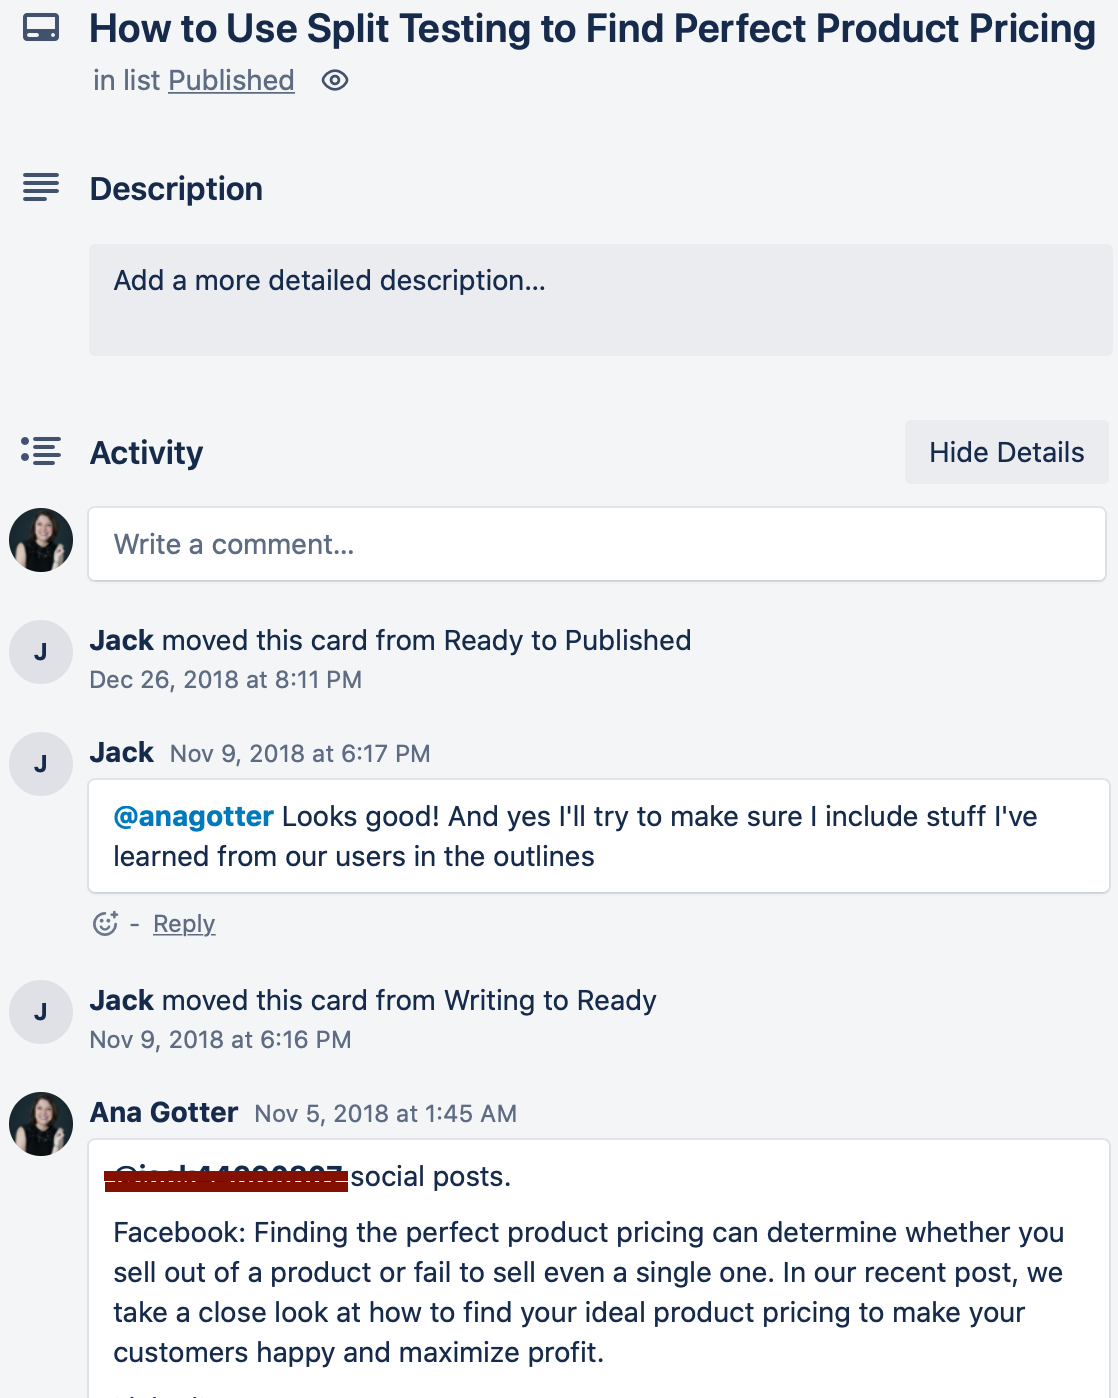 The comment feature on Trello